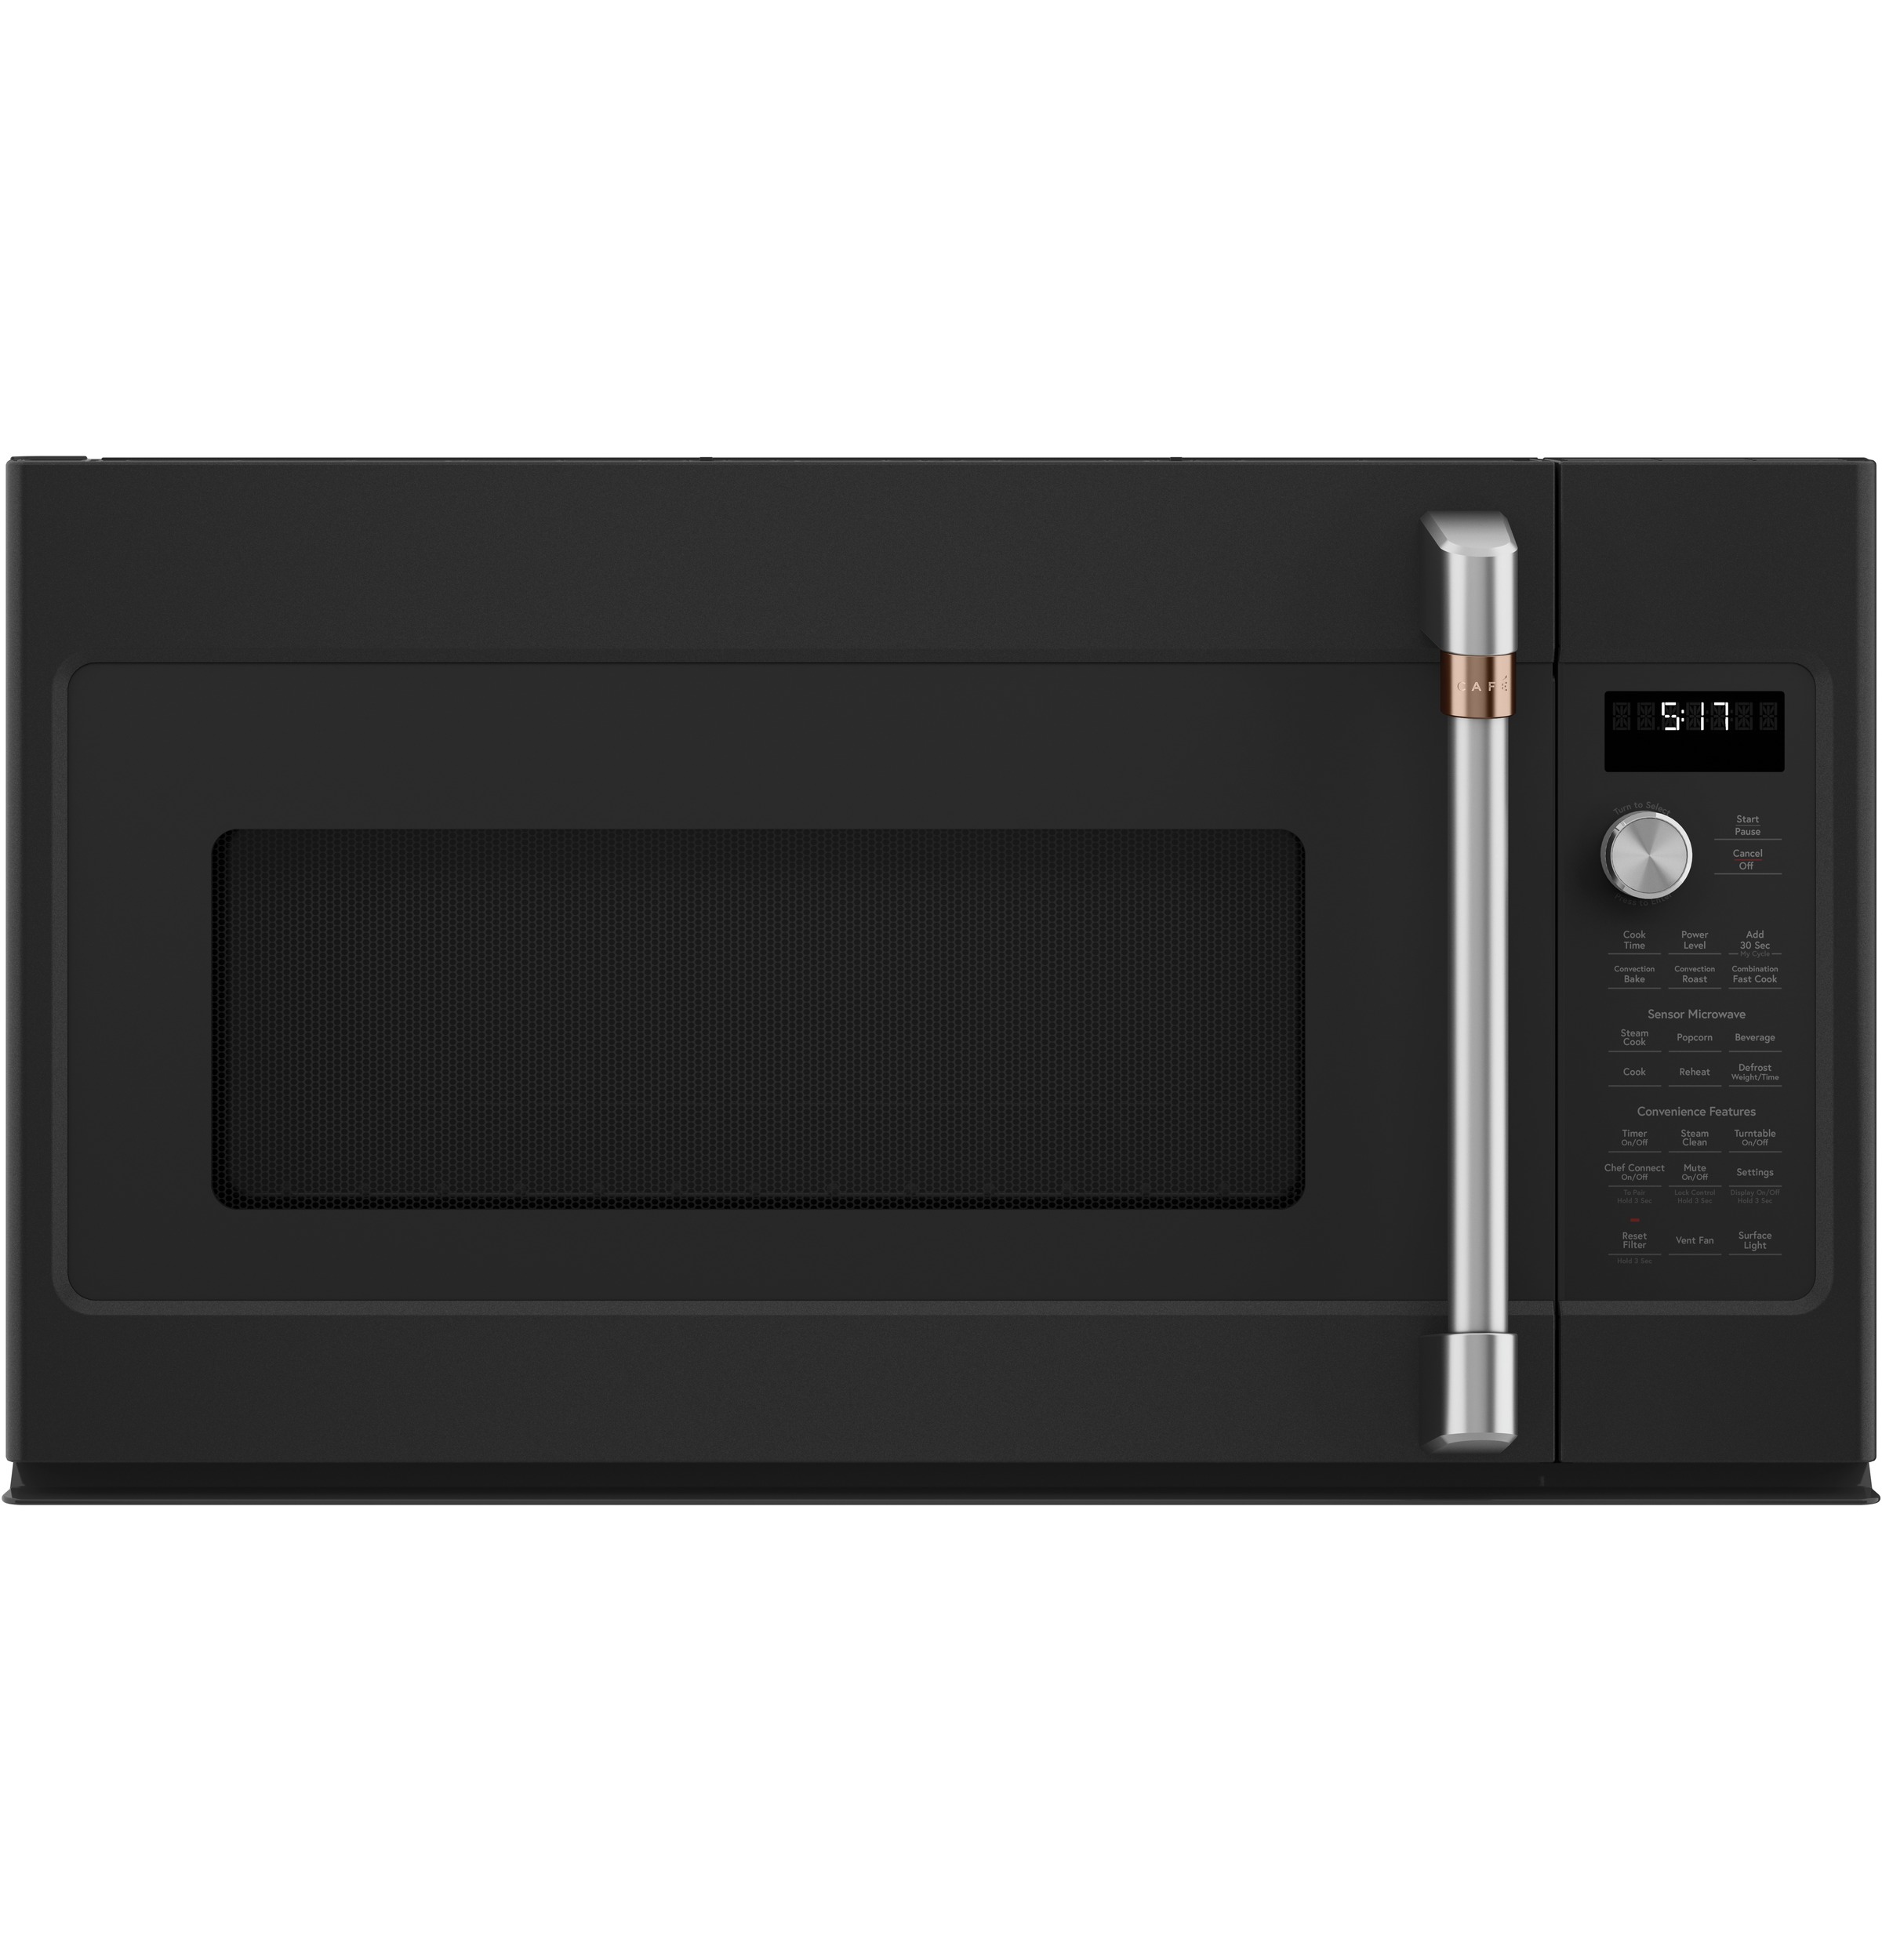 GE Cafe CVM517P3MD1 1.7 cu. ft. Over-the-Range Microwave with